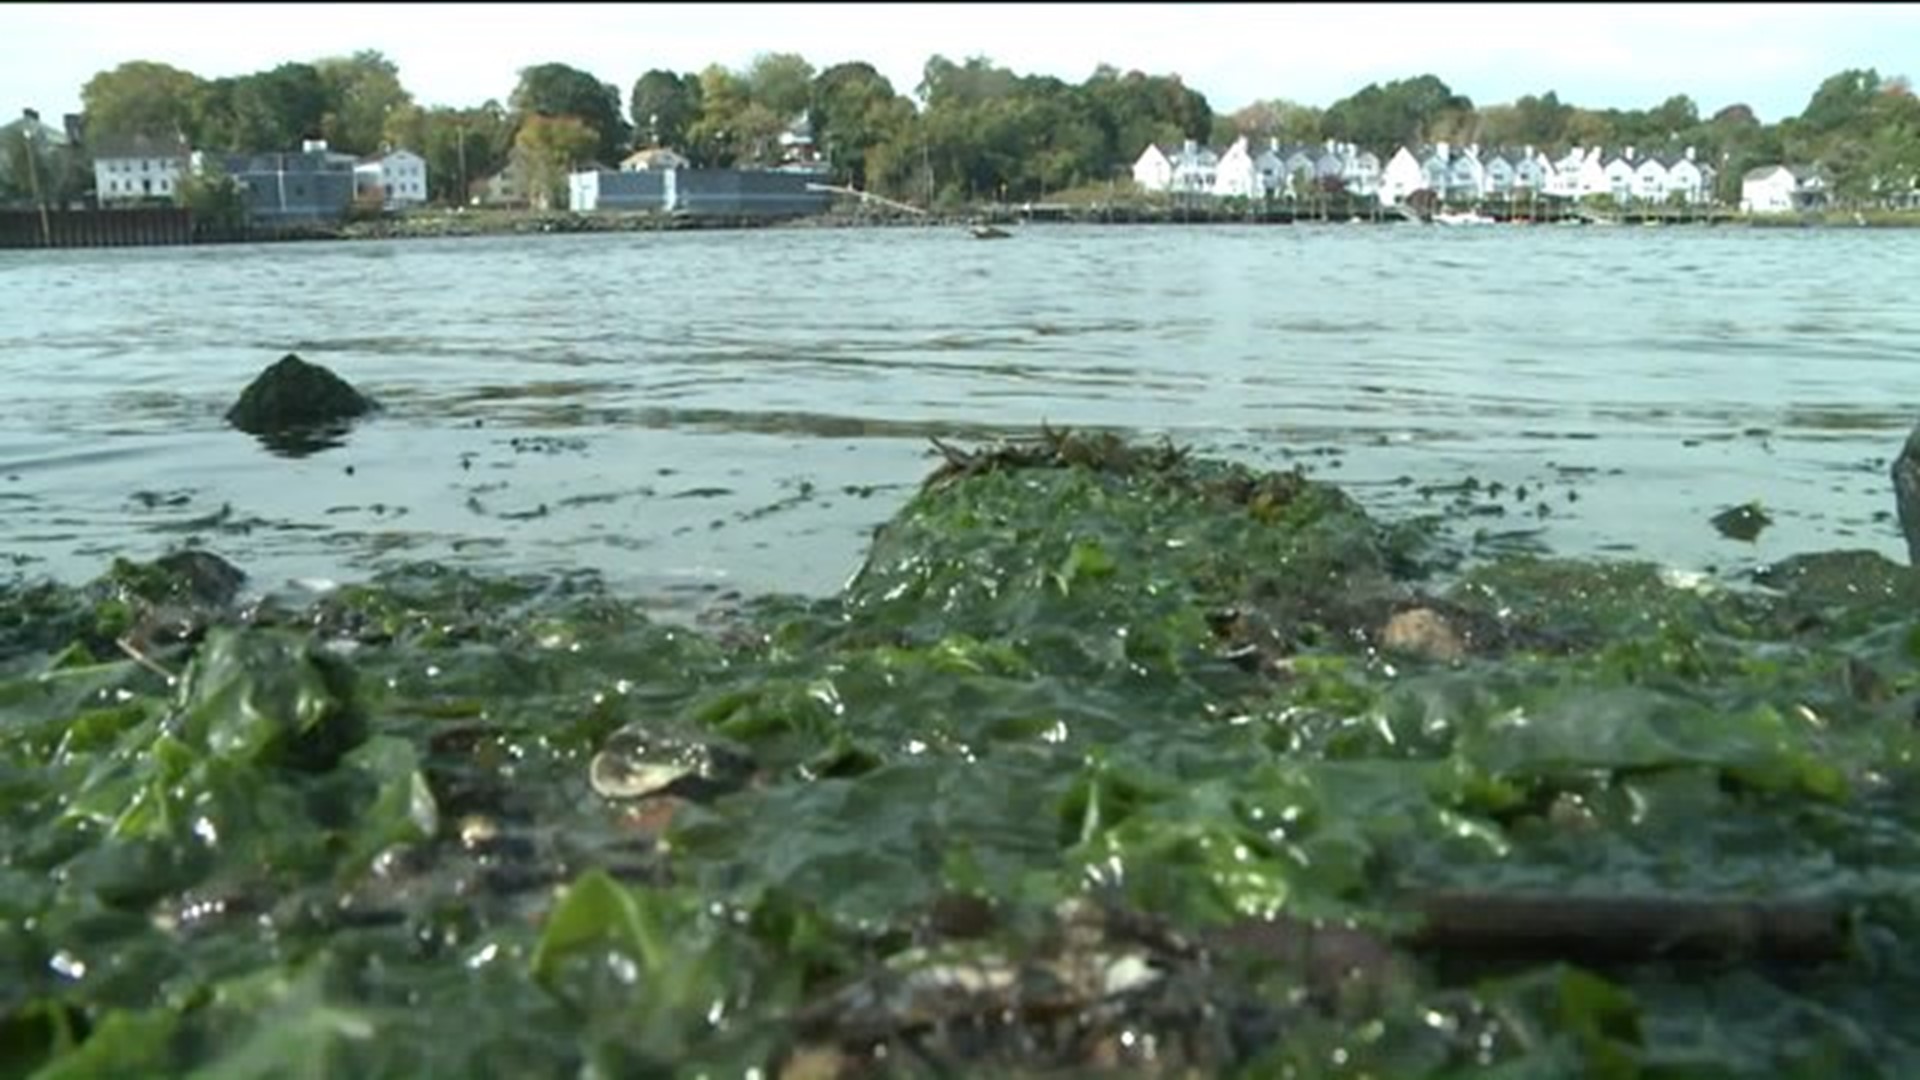 Pollution in Quinnipiac River cause for health concerns